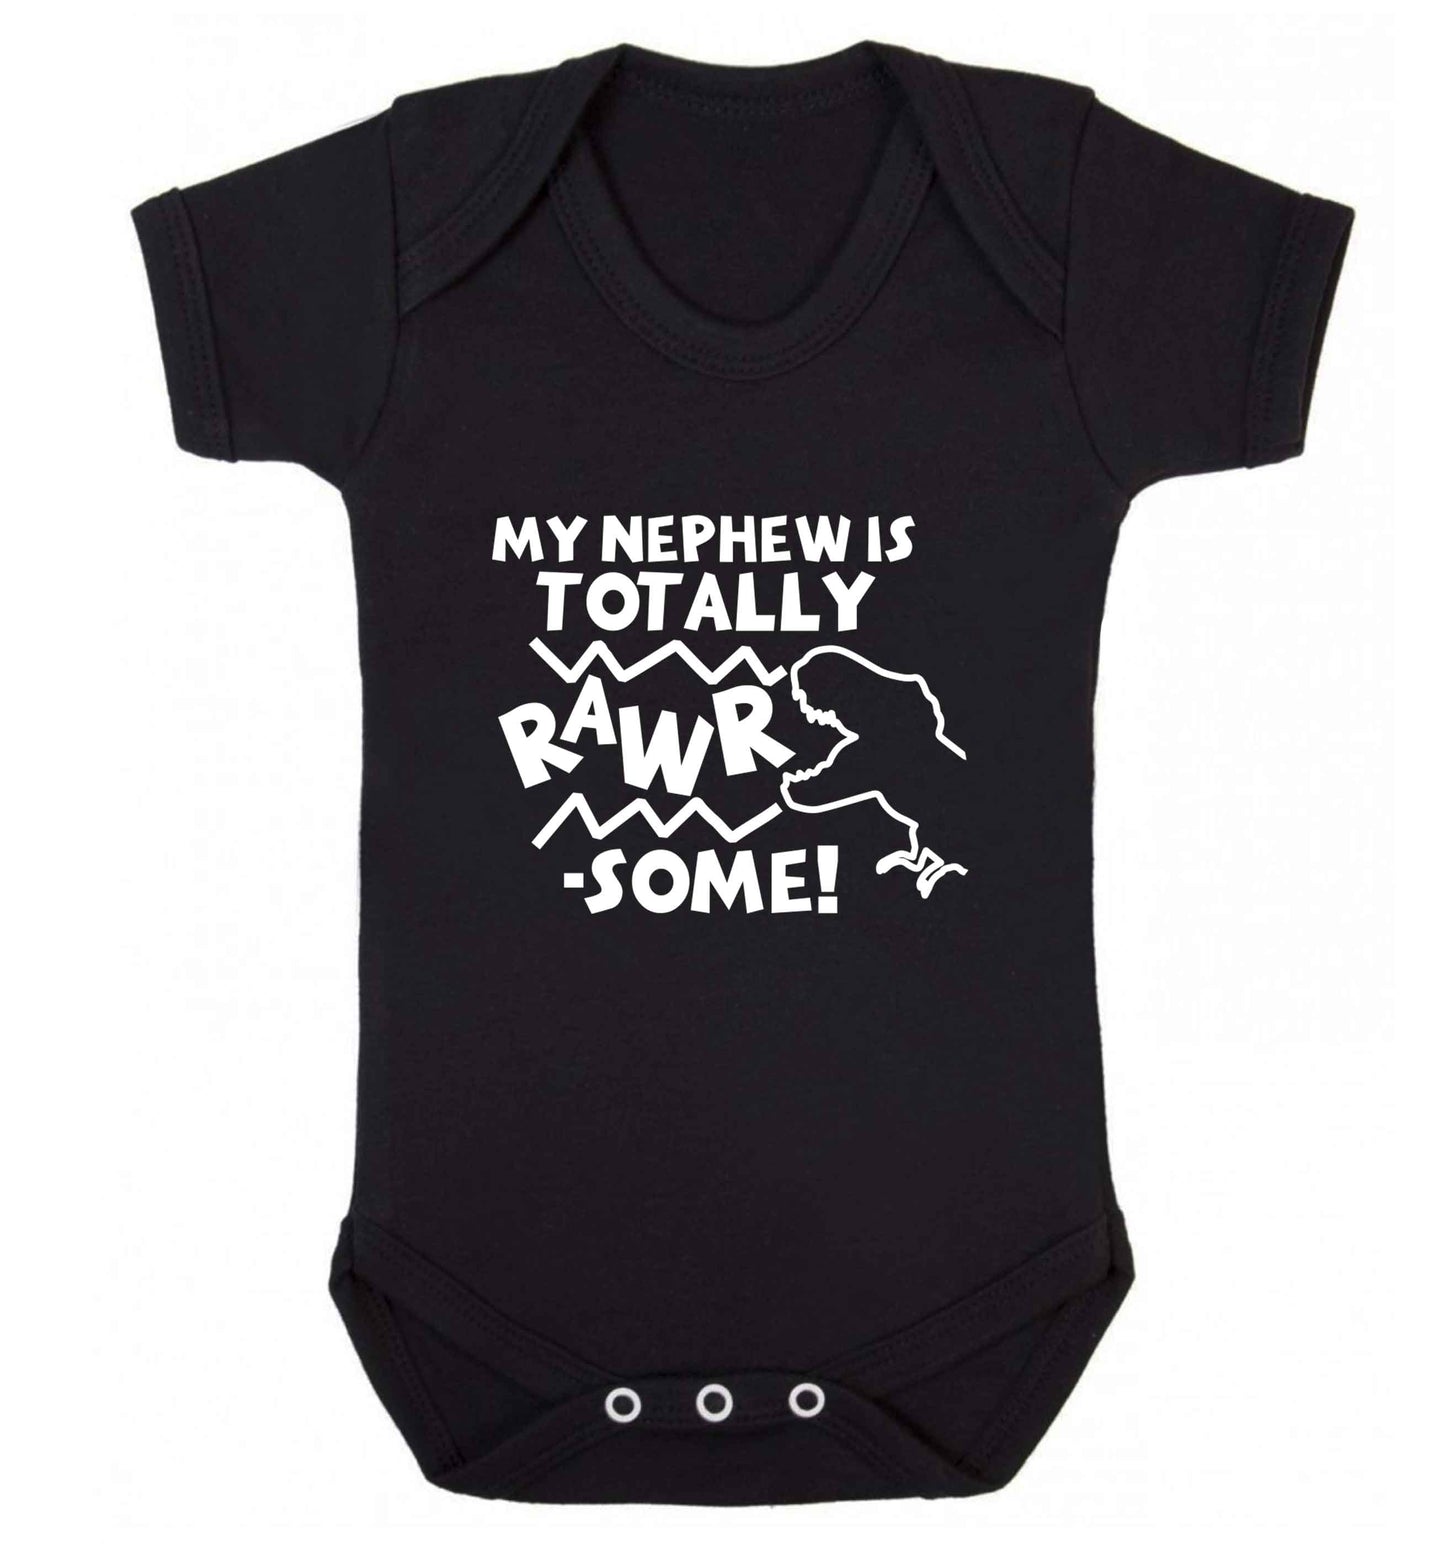 My nephew is totally rawrsome baby vest black 18-24 months